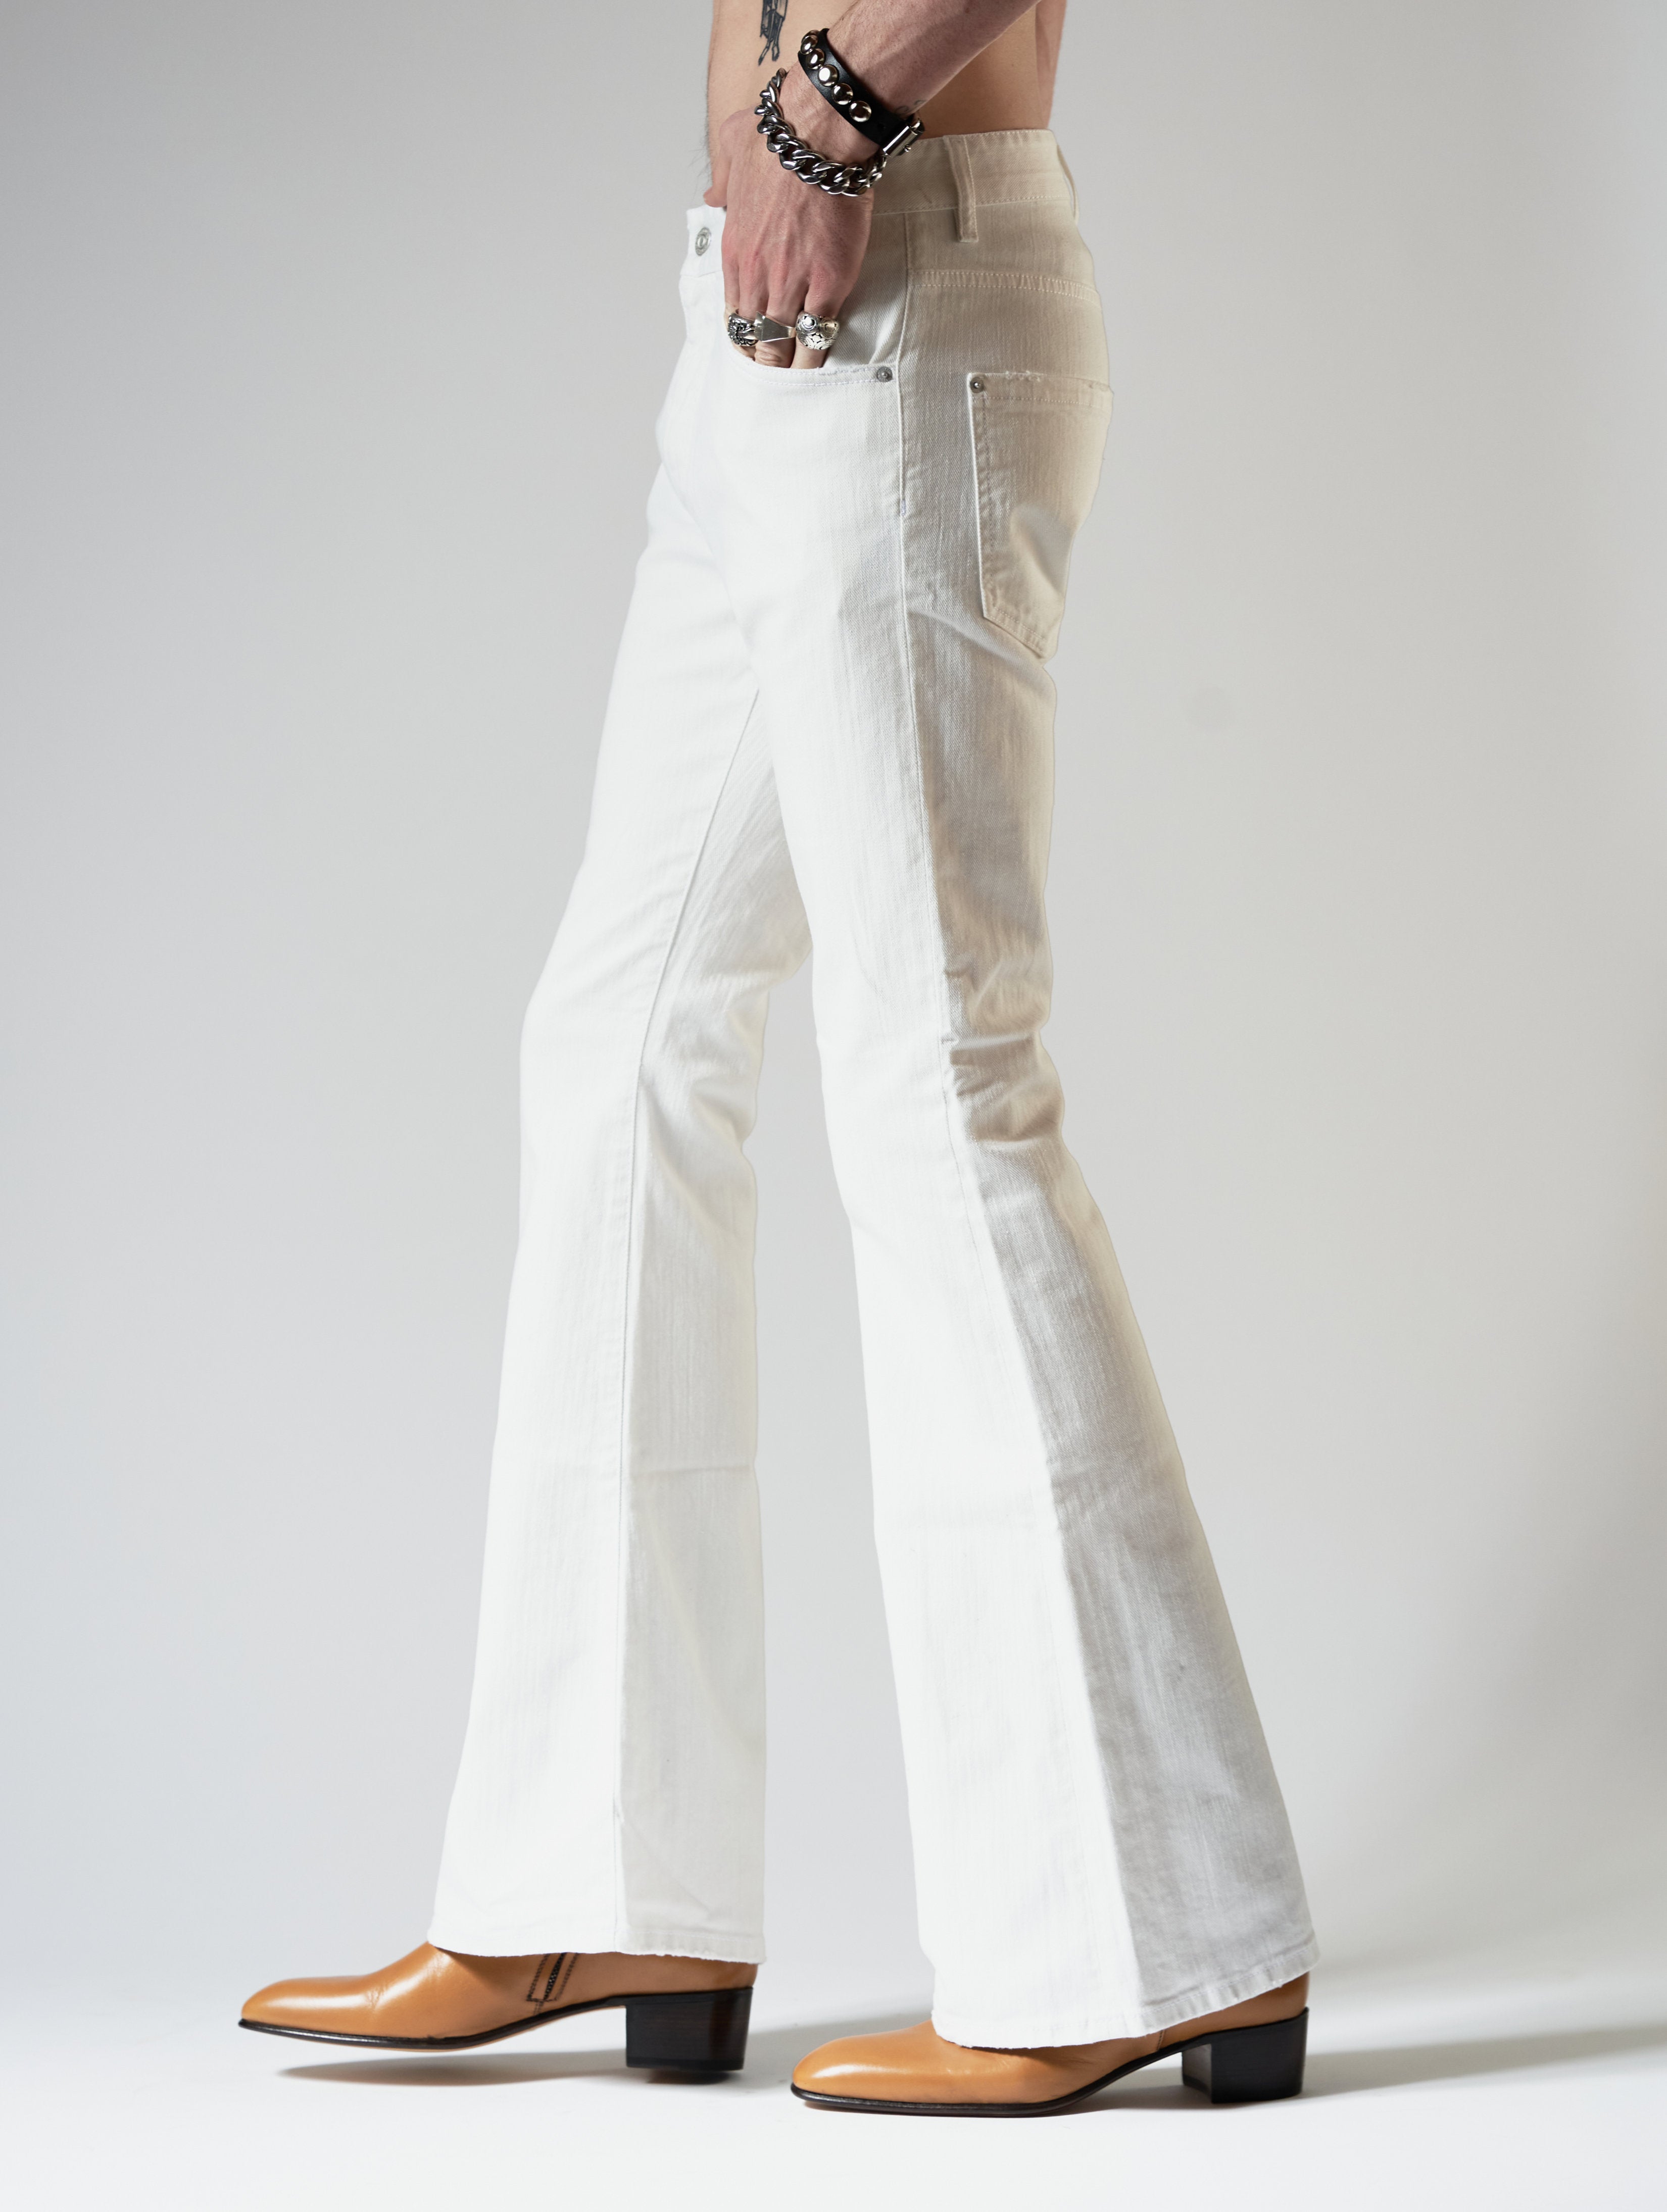 Look at these unique pants! Men's bell bottoms with leather accents.  #wearvintage #vintagepants #truev… | Vintage pants, Mens bell bottom jeans, Bell  bottom jeans